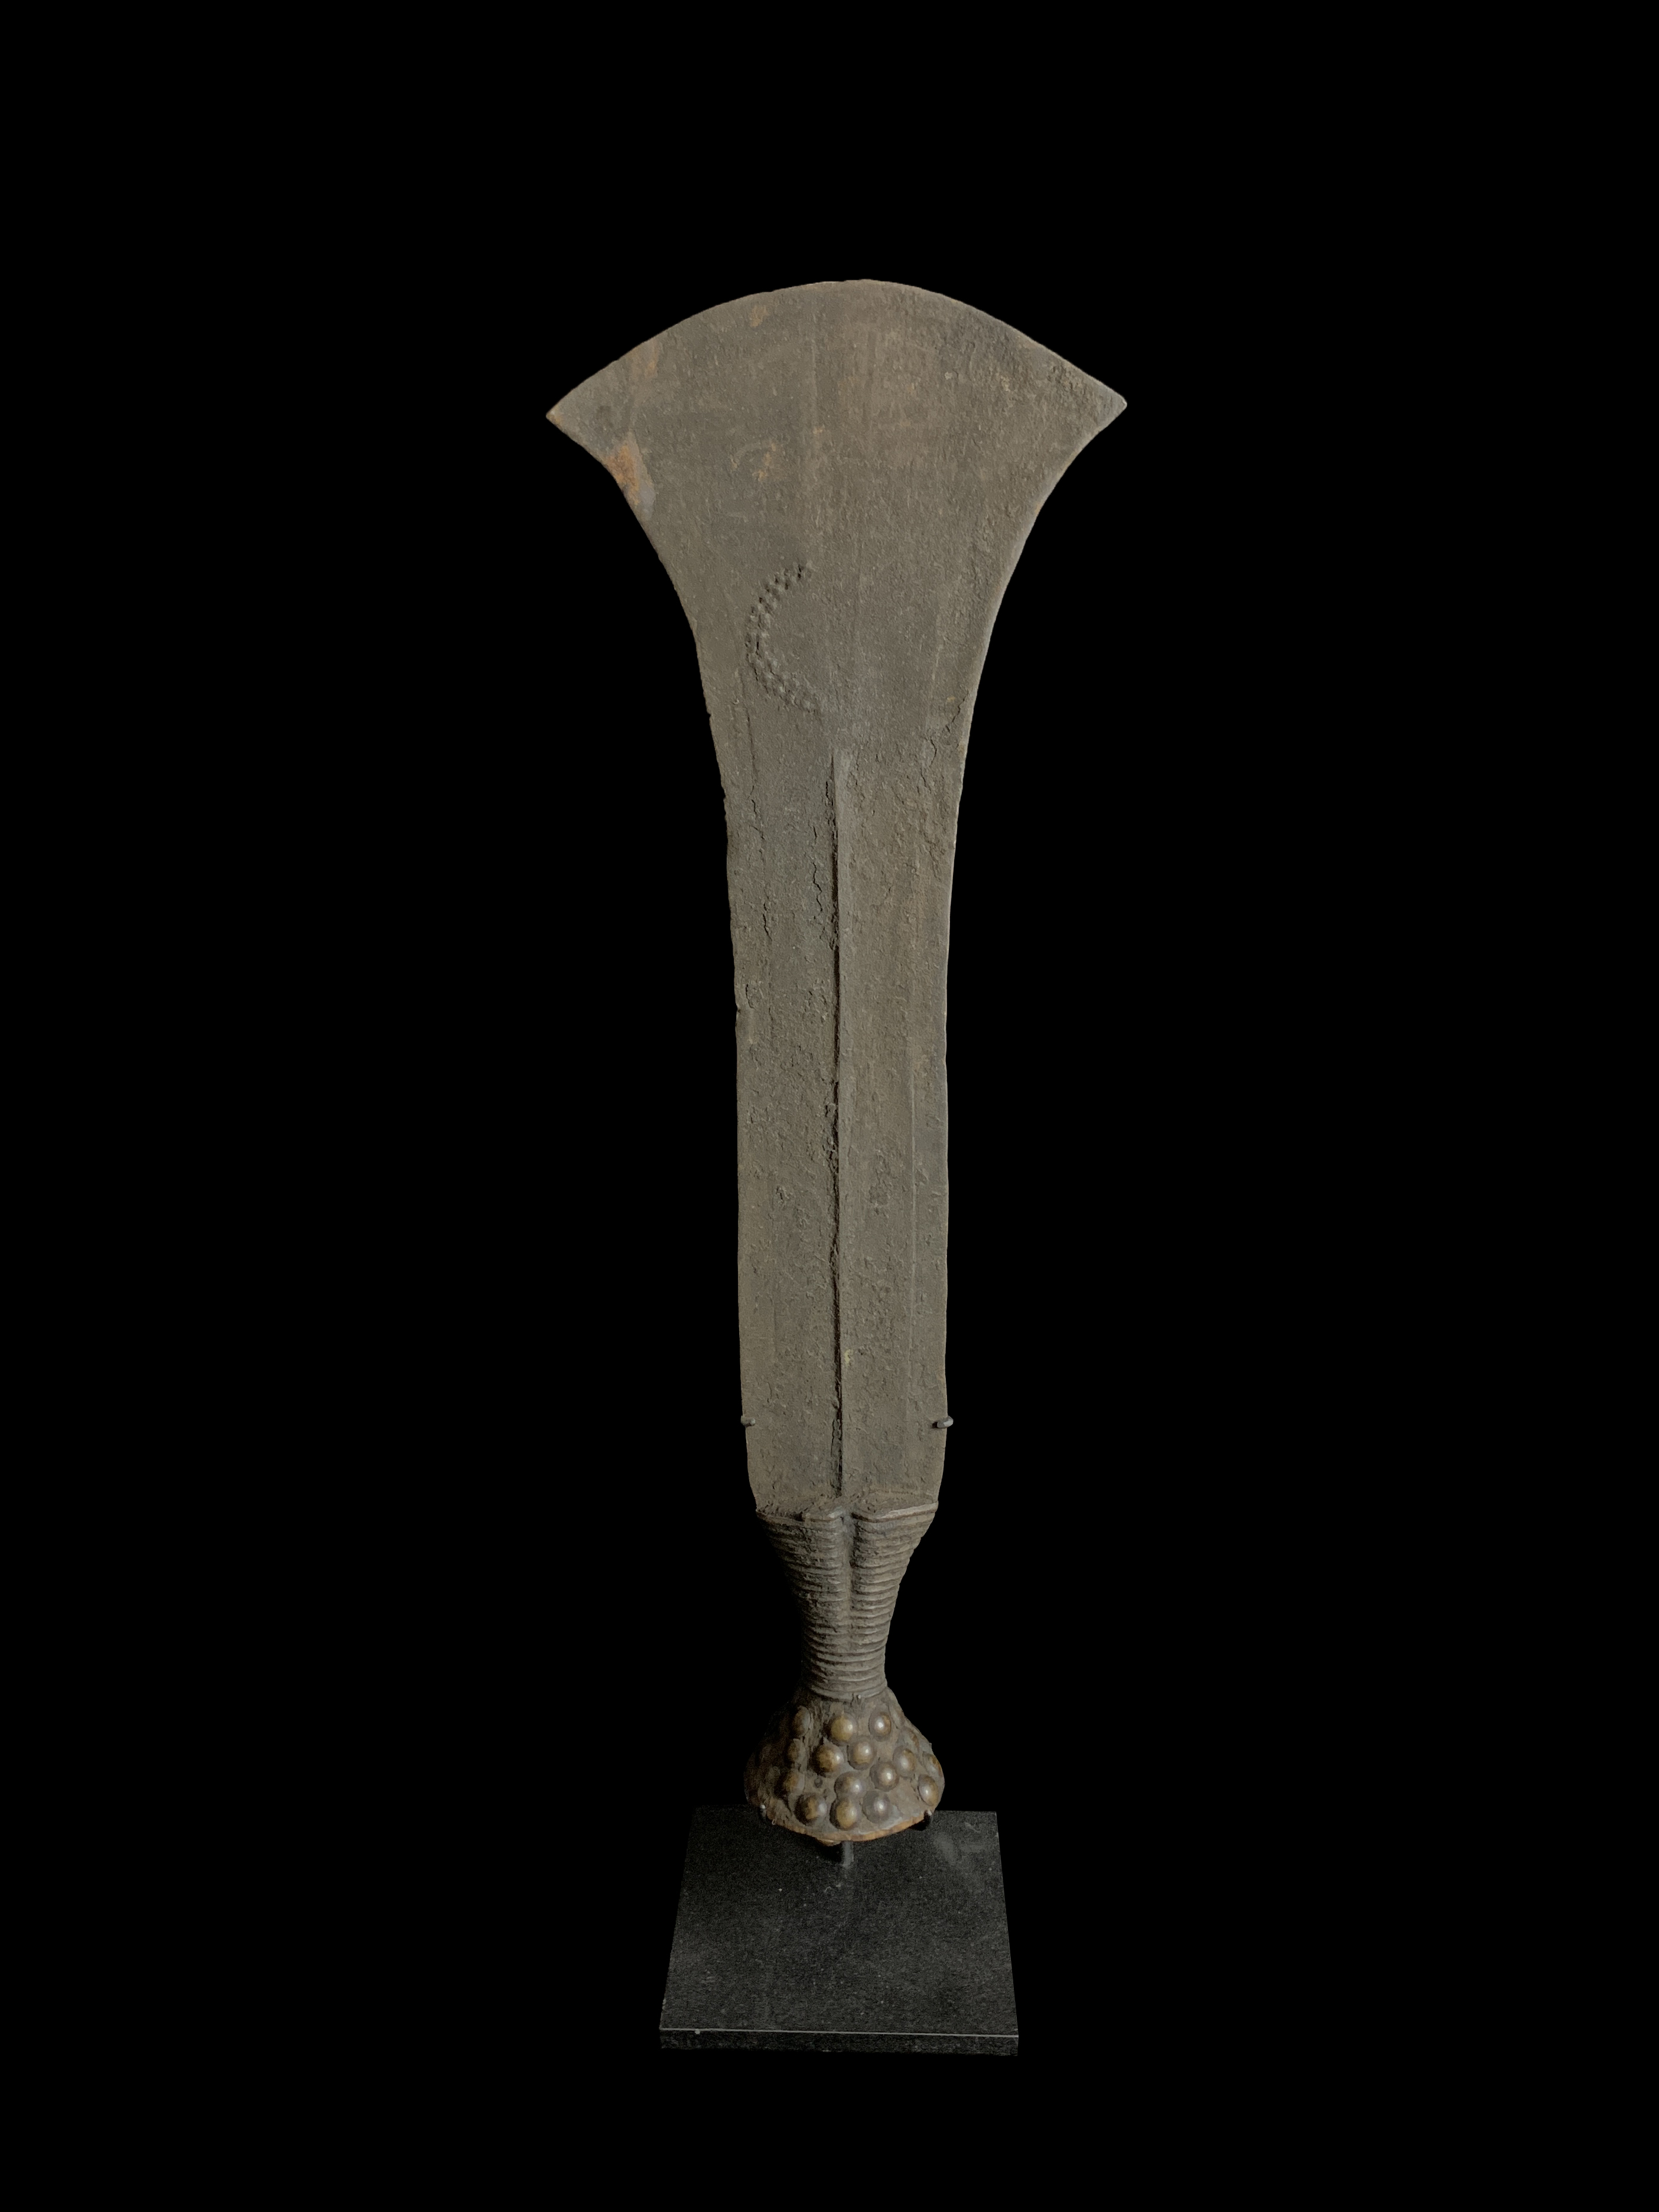 Knife with studded handle - Konda People - D.R. Congo 